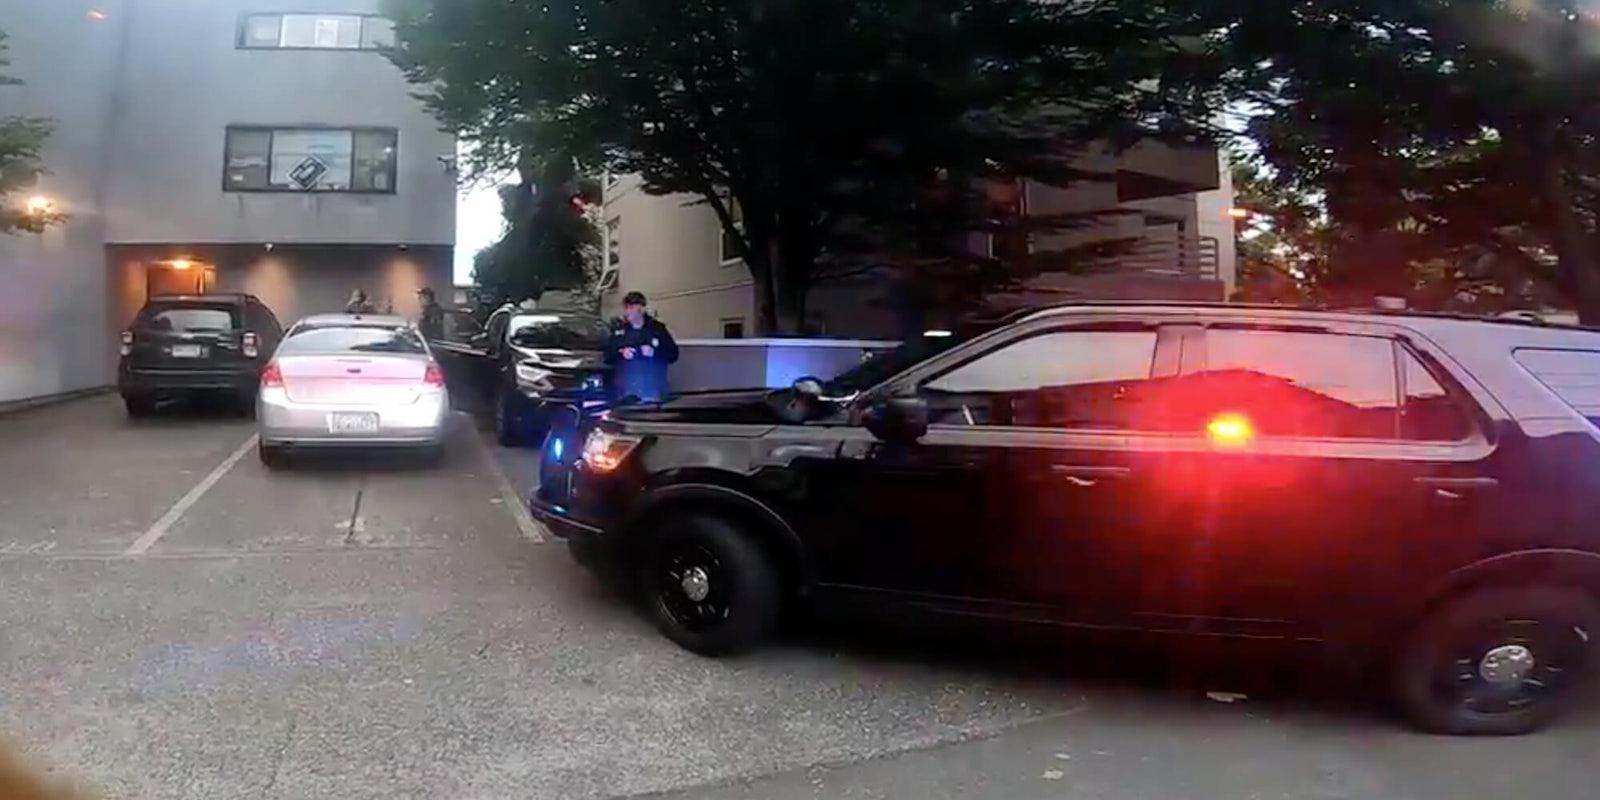 Police vehicles outside of a Seattle home